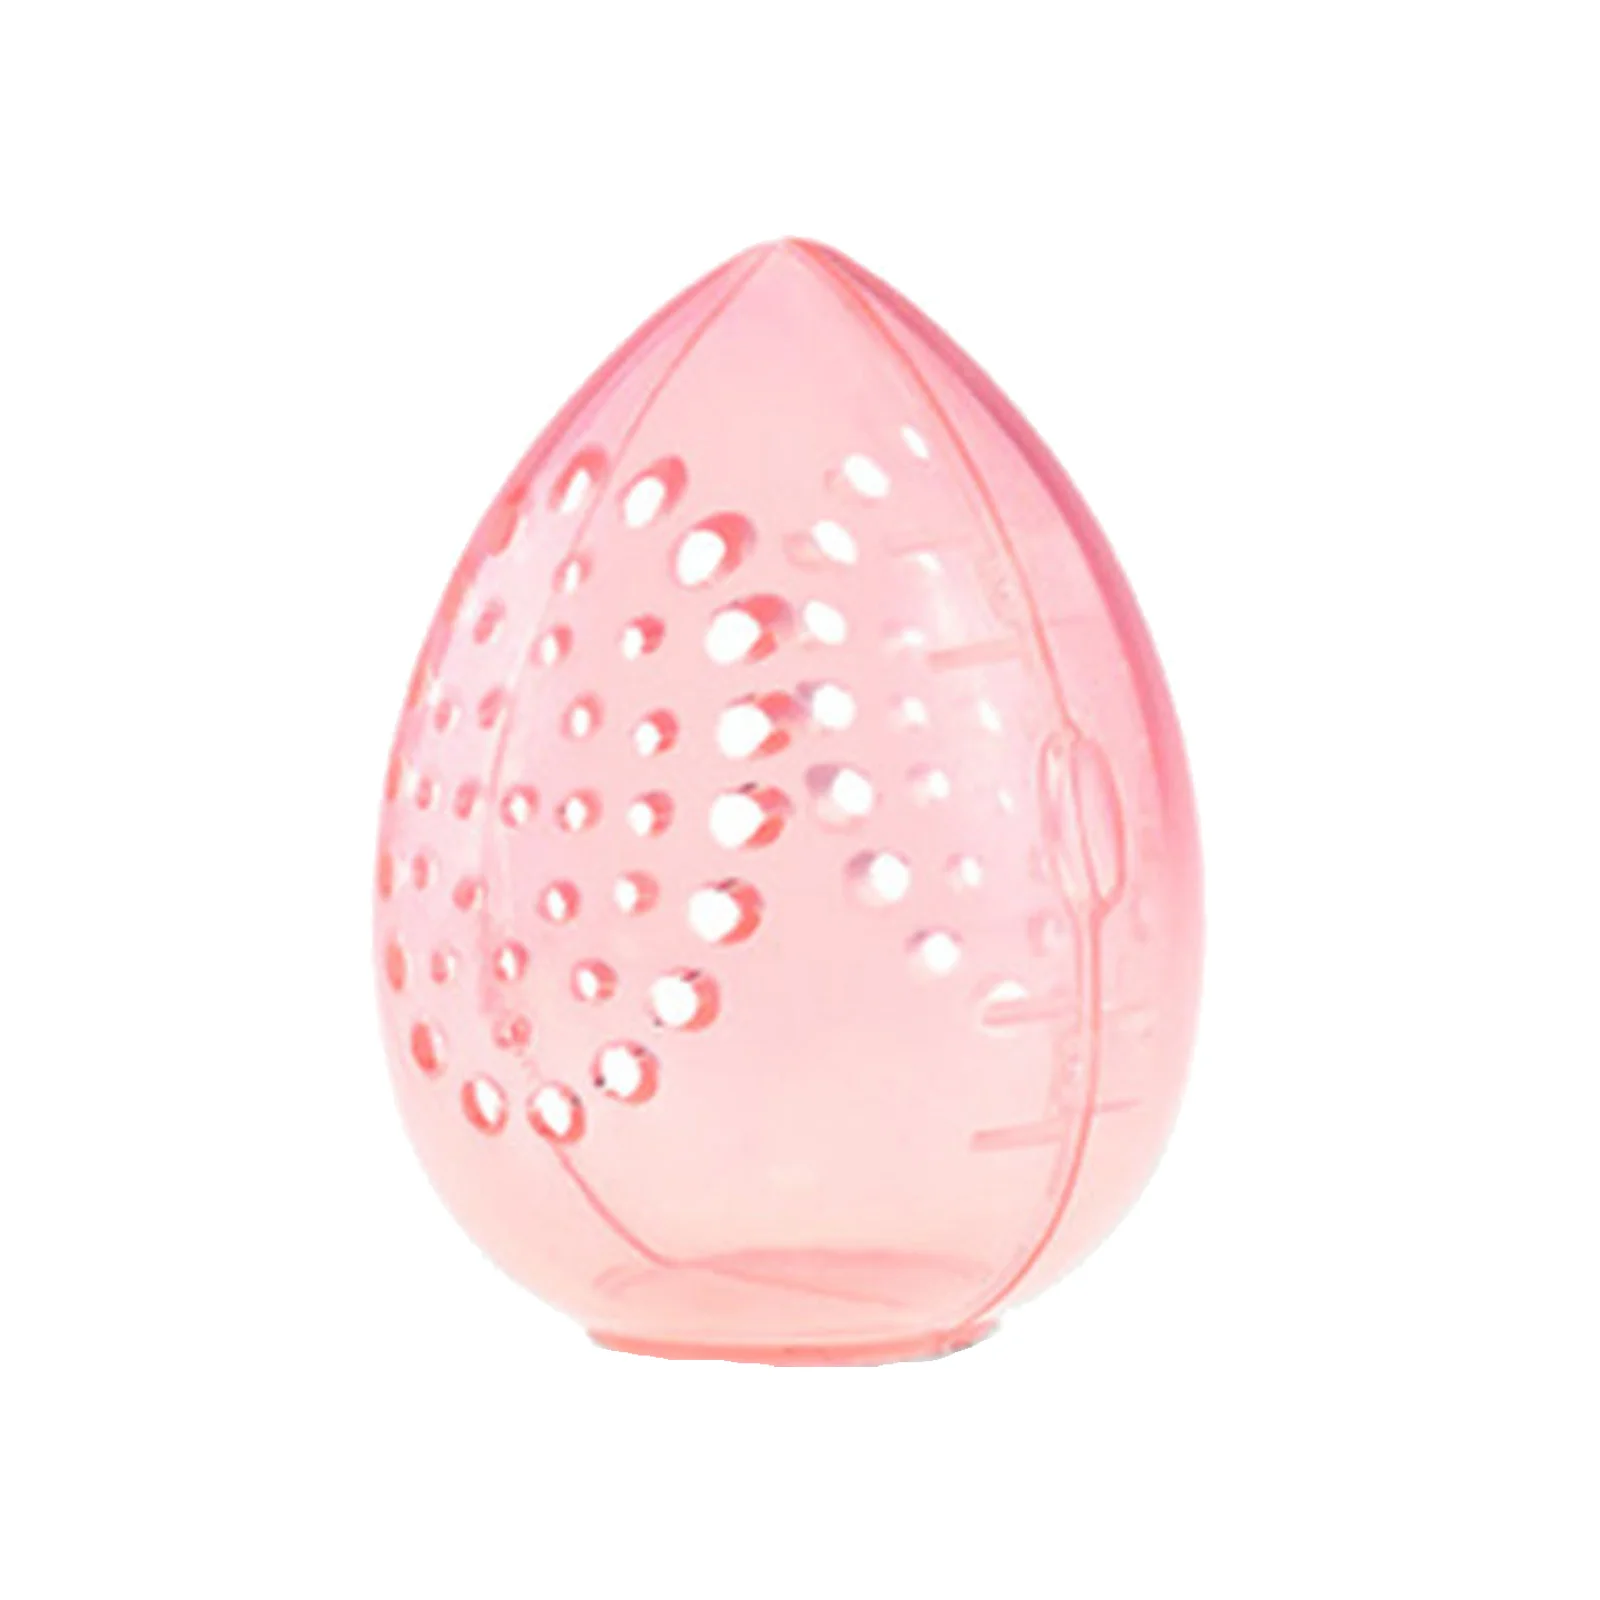 

Makeup Puff Storage Case Multi-hole Waterproof Beauty Sponge Holder Container Stand Teardrop-shaped Transparent Pink